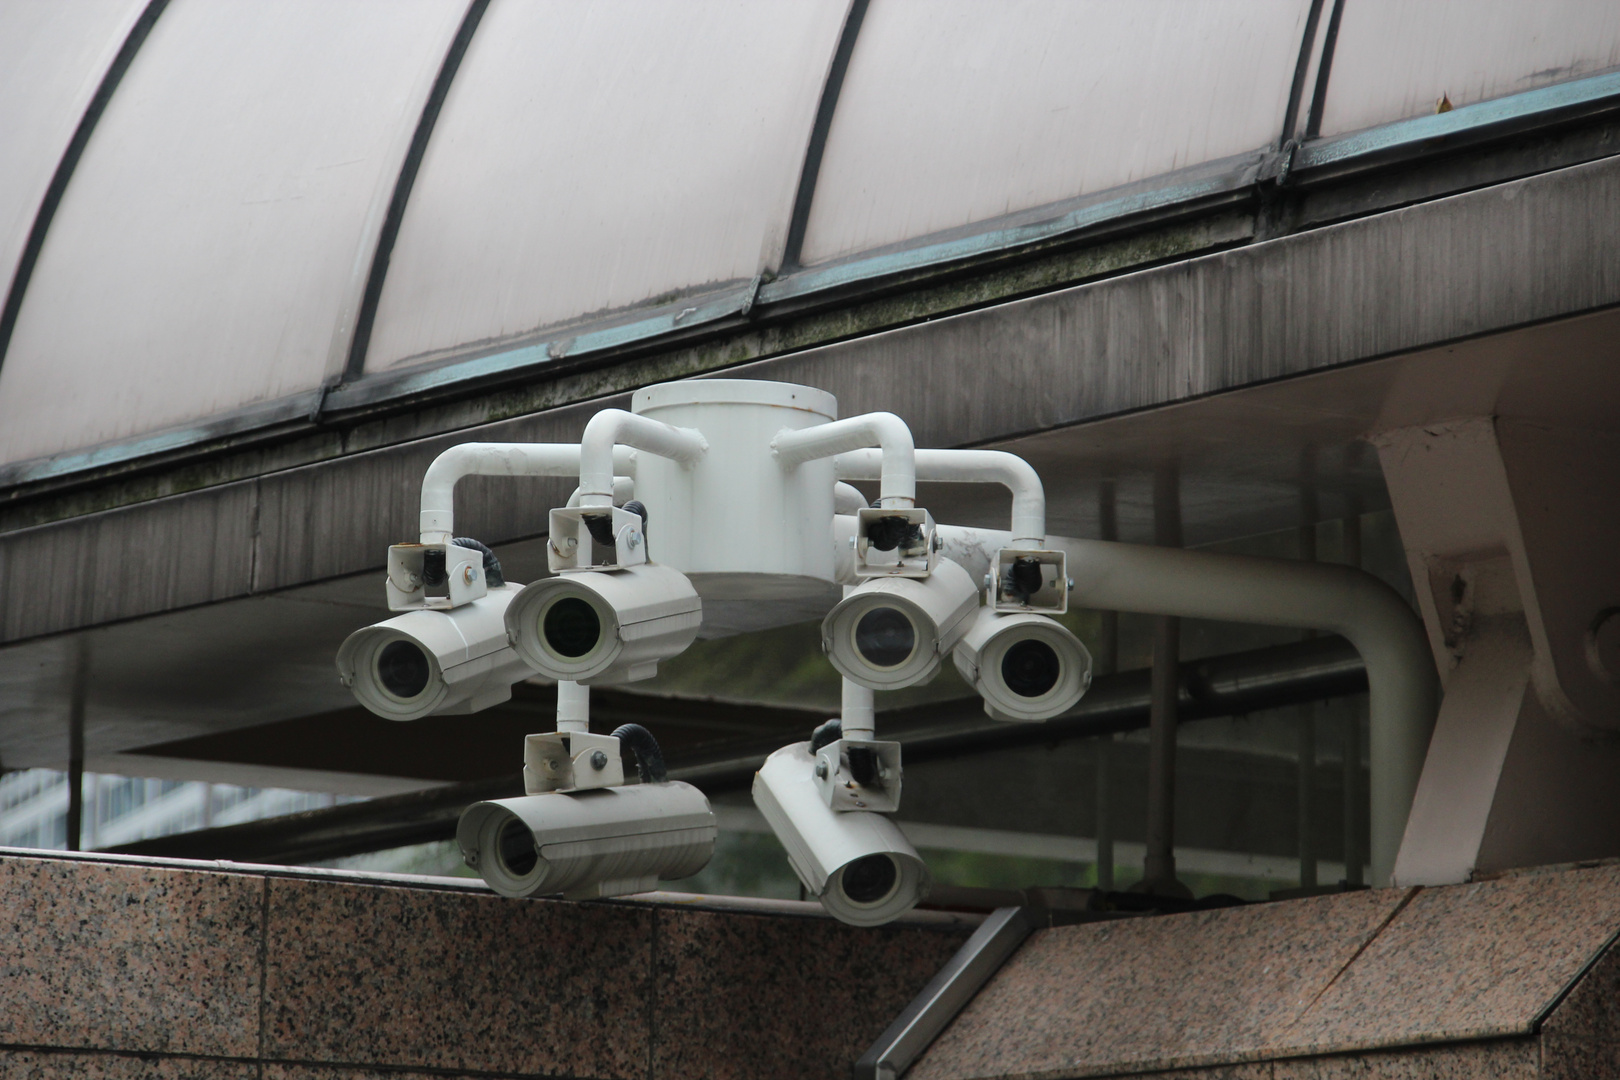 Big brother is watching you!